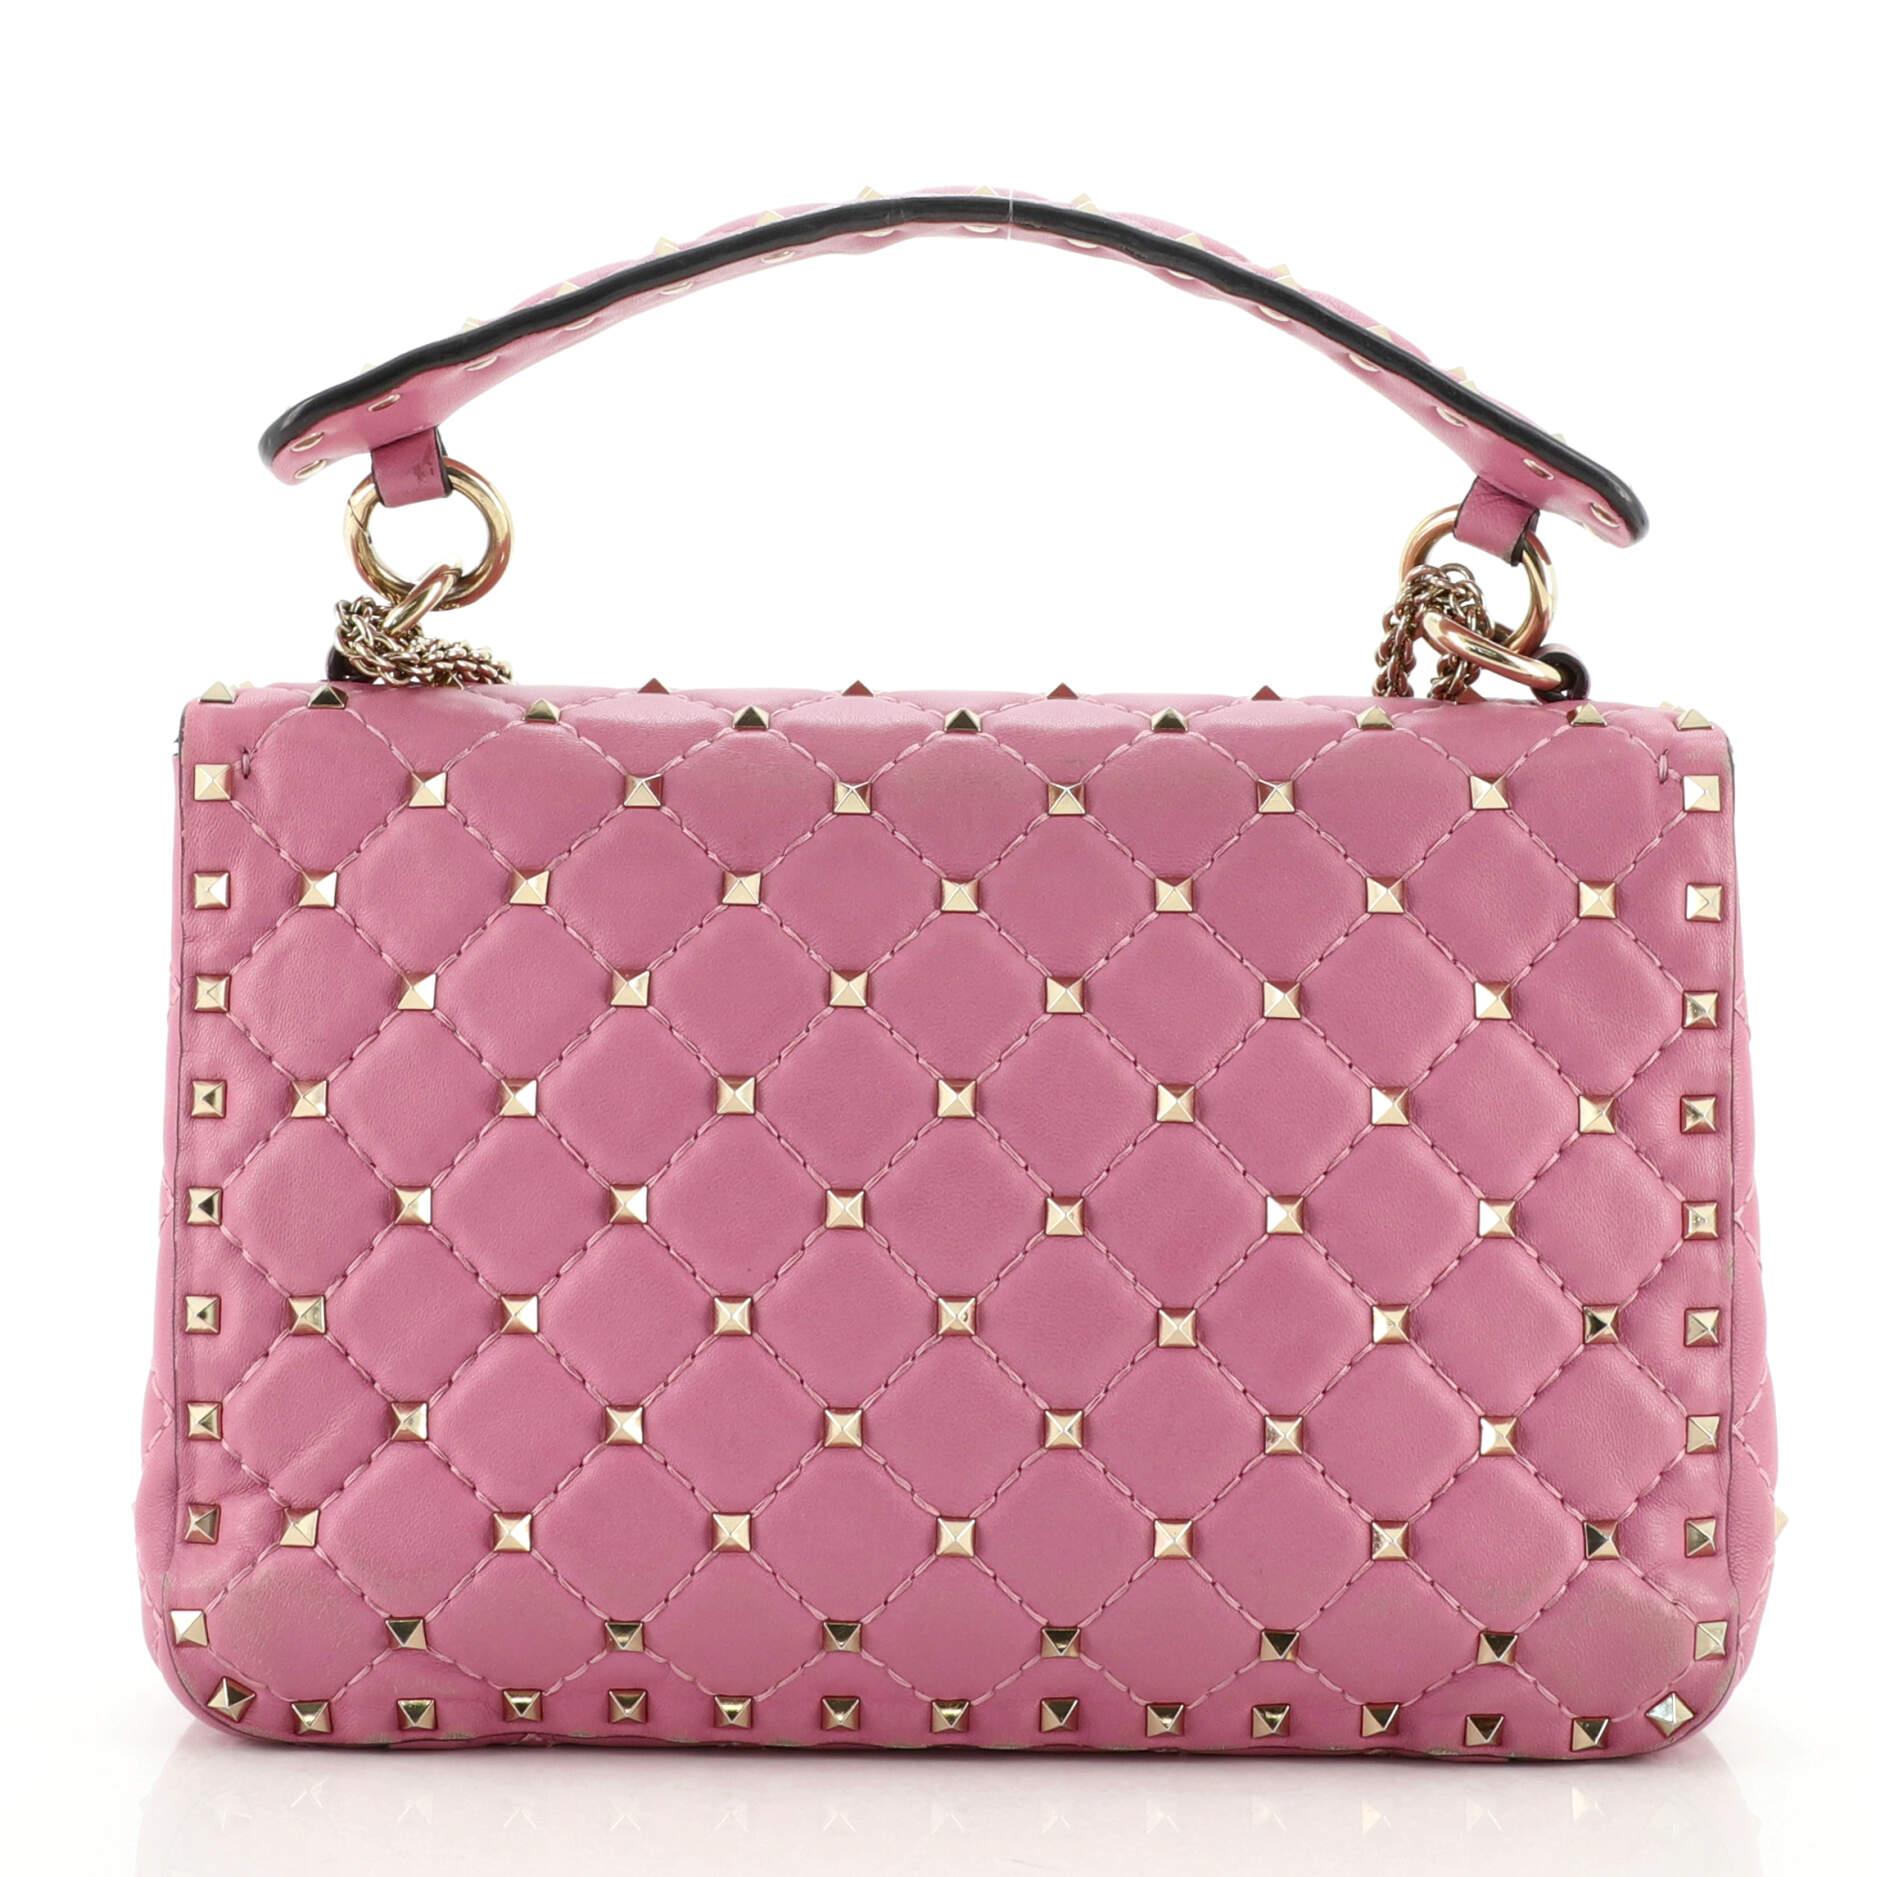 Pink Valentino Rockstud Spike Flap Bag Quilted Leather Medium